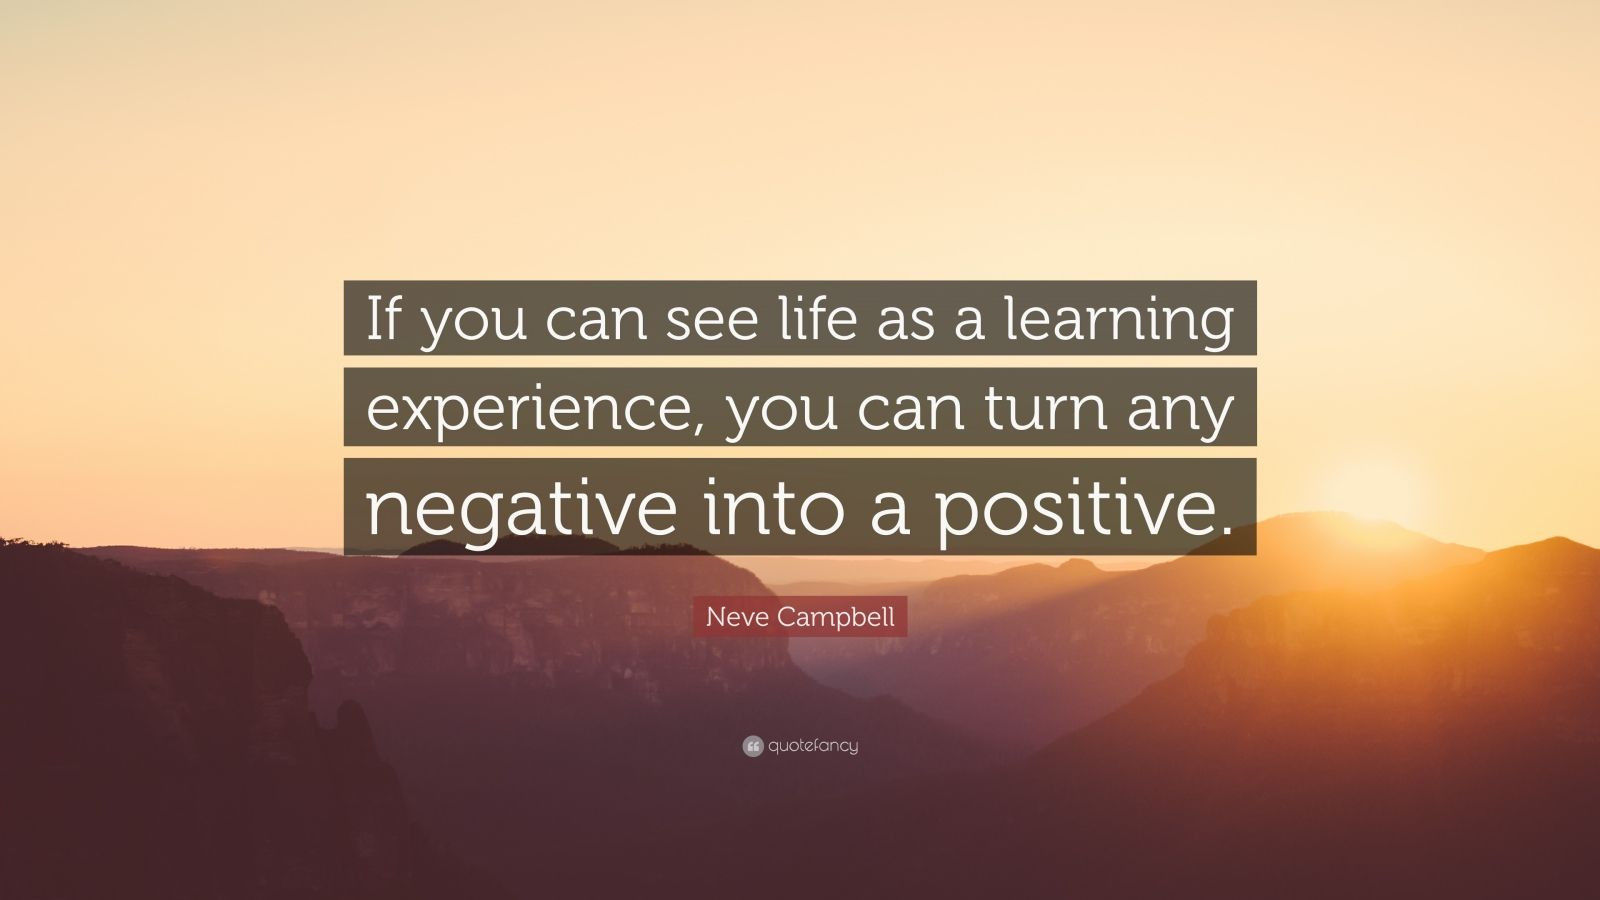 Turning Negatives Into Positives Quotes
 Neve Campbell Quote “If you can see life as a learning